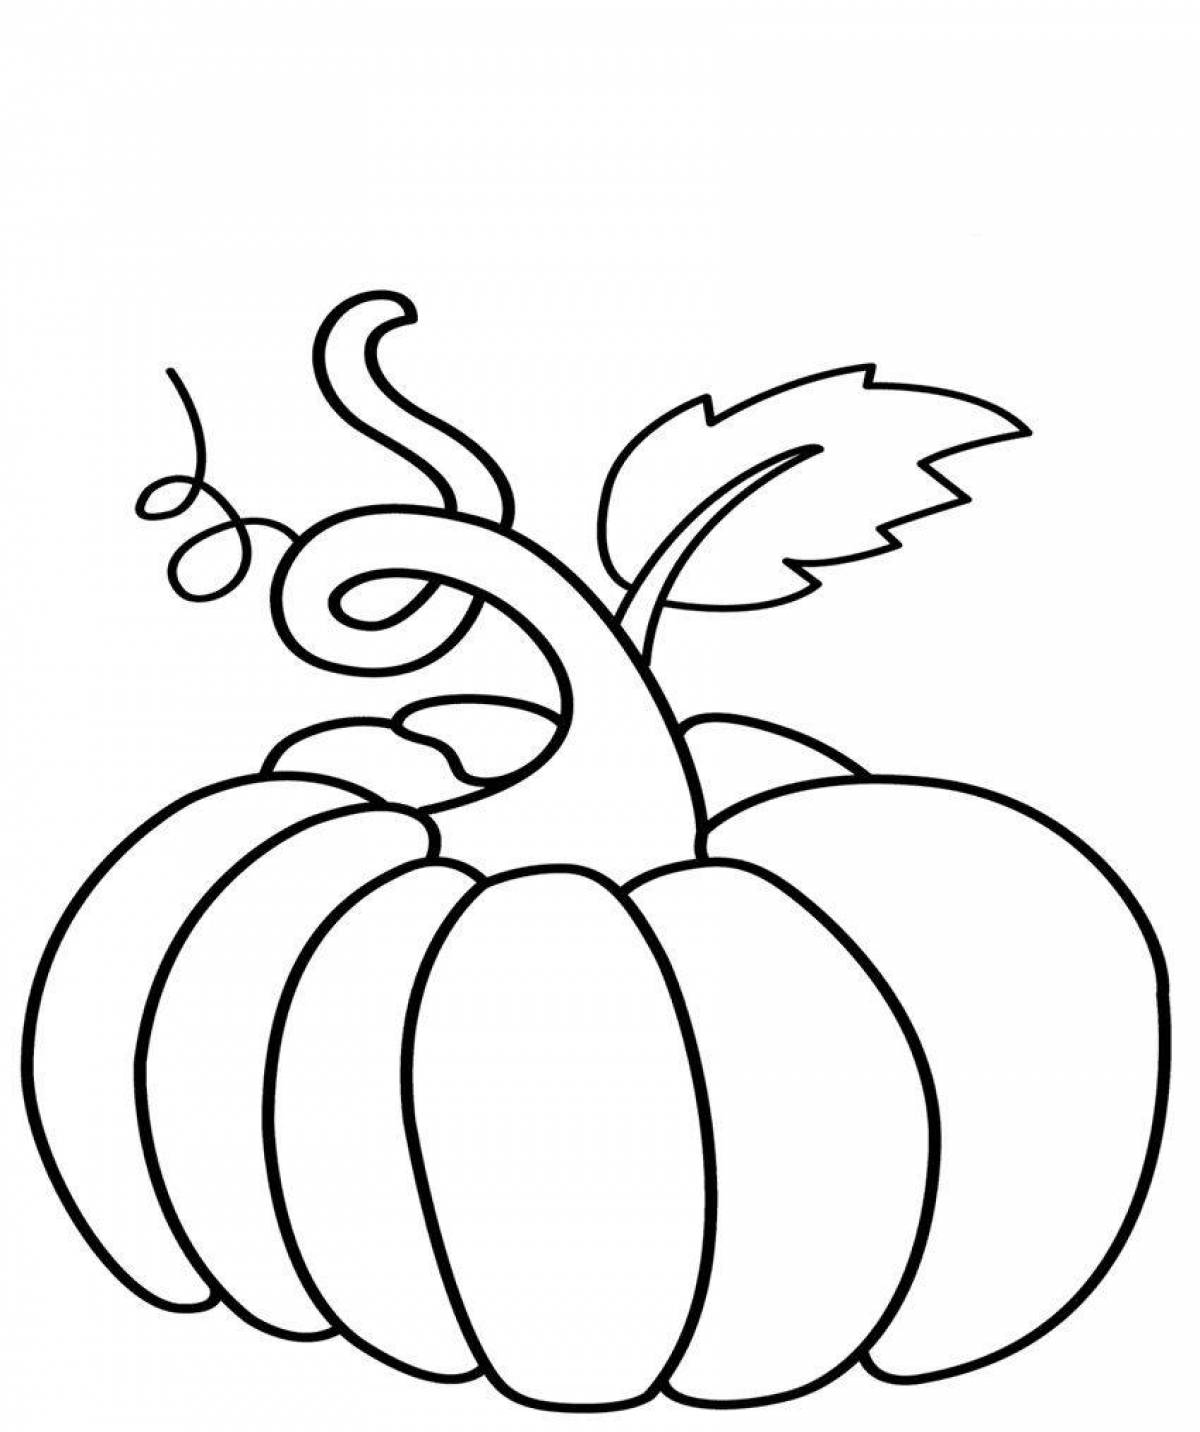 Fun coloring pages with fruits for children 3-4 years old